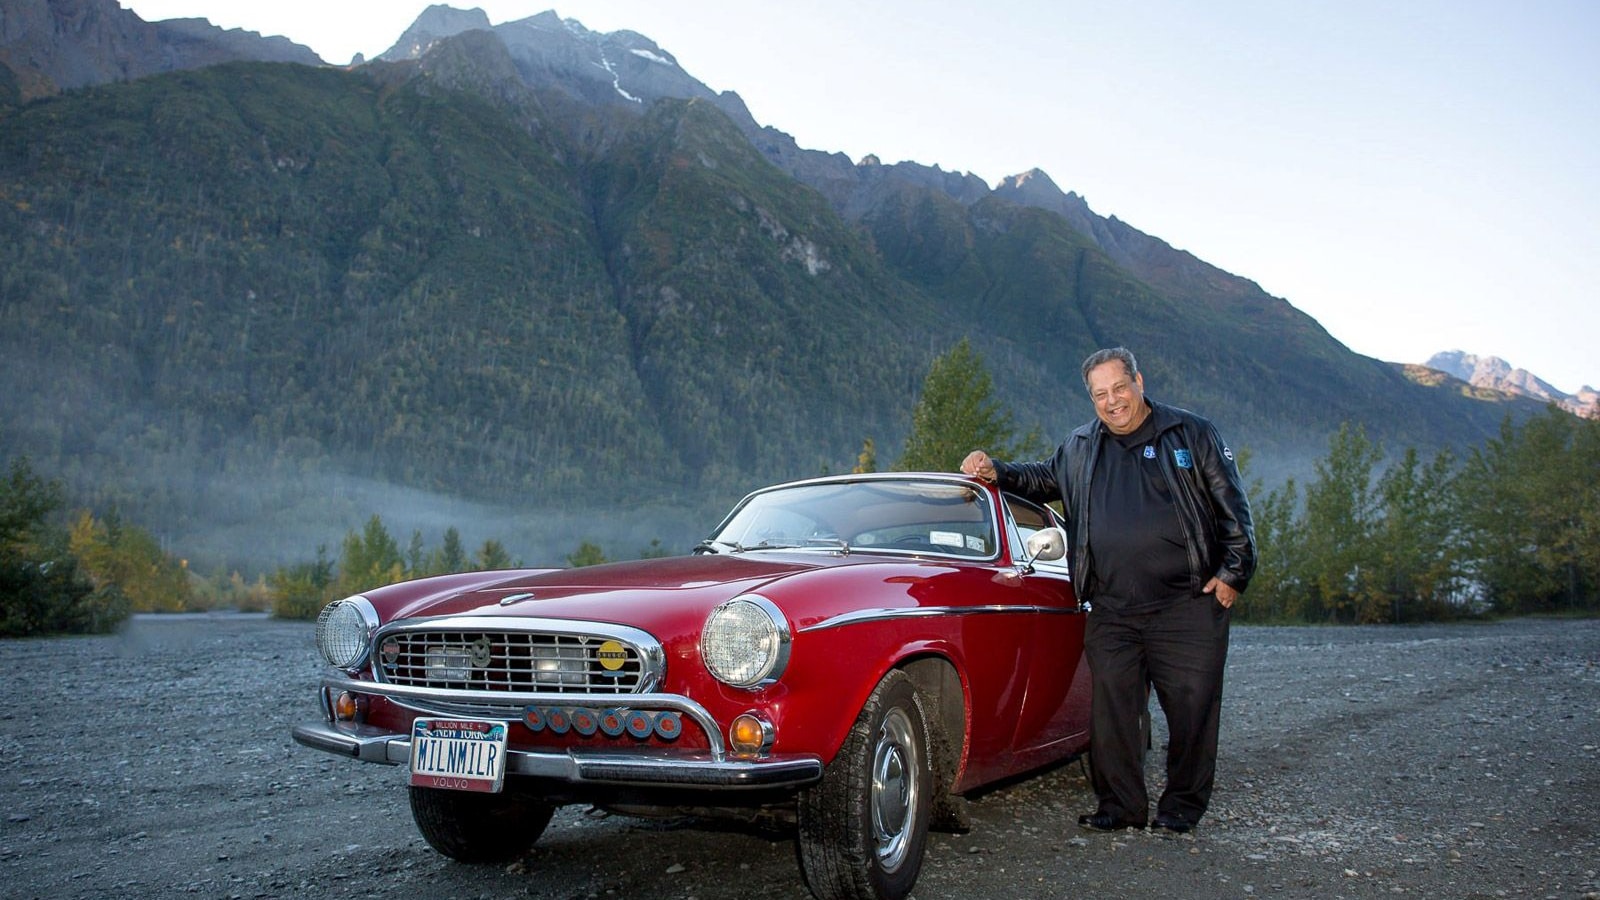 Irv Gordon and his 1966 Volvo 1800S with 3 million miles on the clock